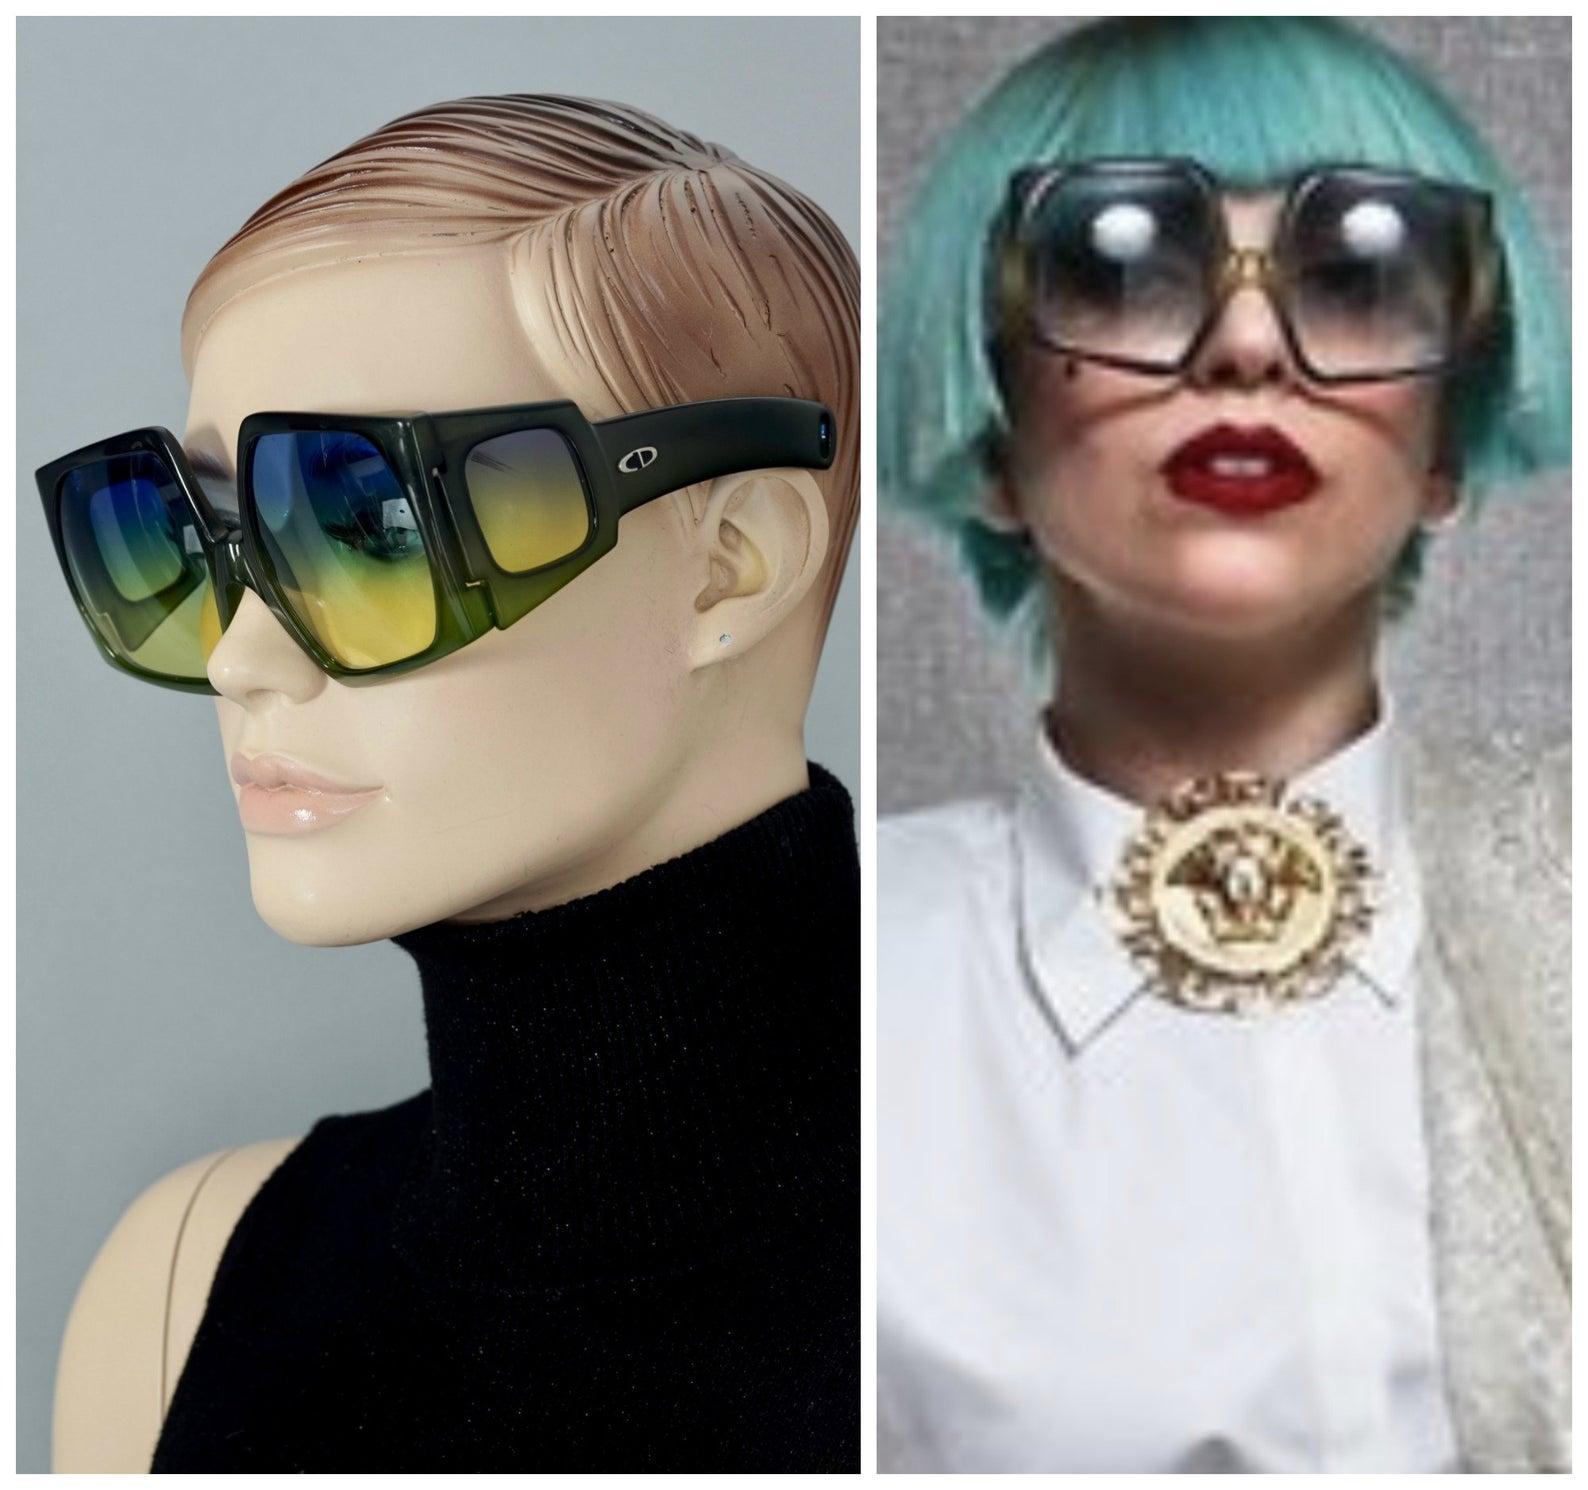 Vintage CHRISTIAN DIOR Lady Gaga Square Side Lenses Oversized Space Age Sunglasses

Measurements:
Height: 2.67 inches (6,8 cm)
Horizontal Width: 5.66 inches (14.4 cm)
Temple Length: 5.11 inches (13 cm)

Features:
- 100% Authentic CHRISTIAN DIOR.
-